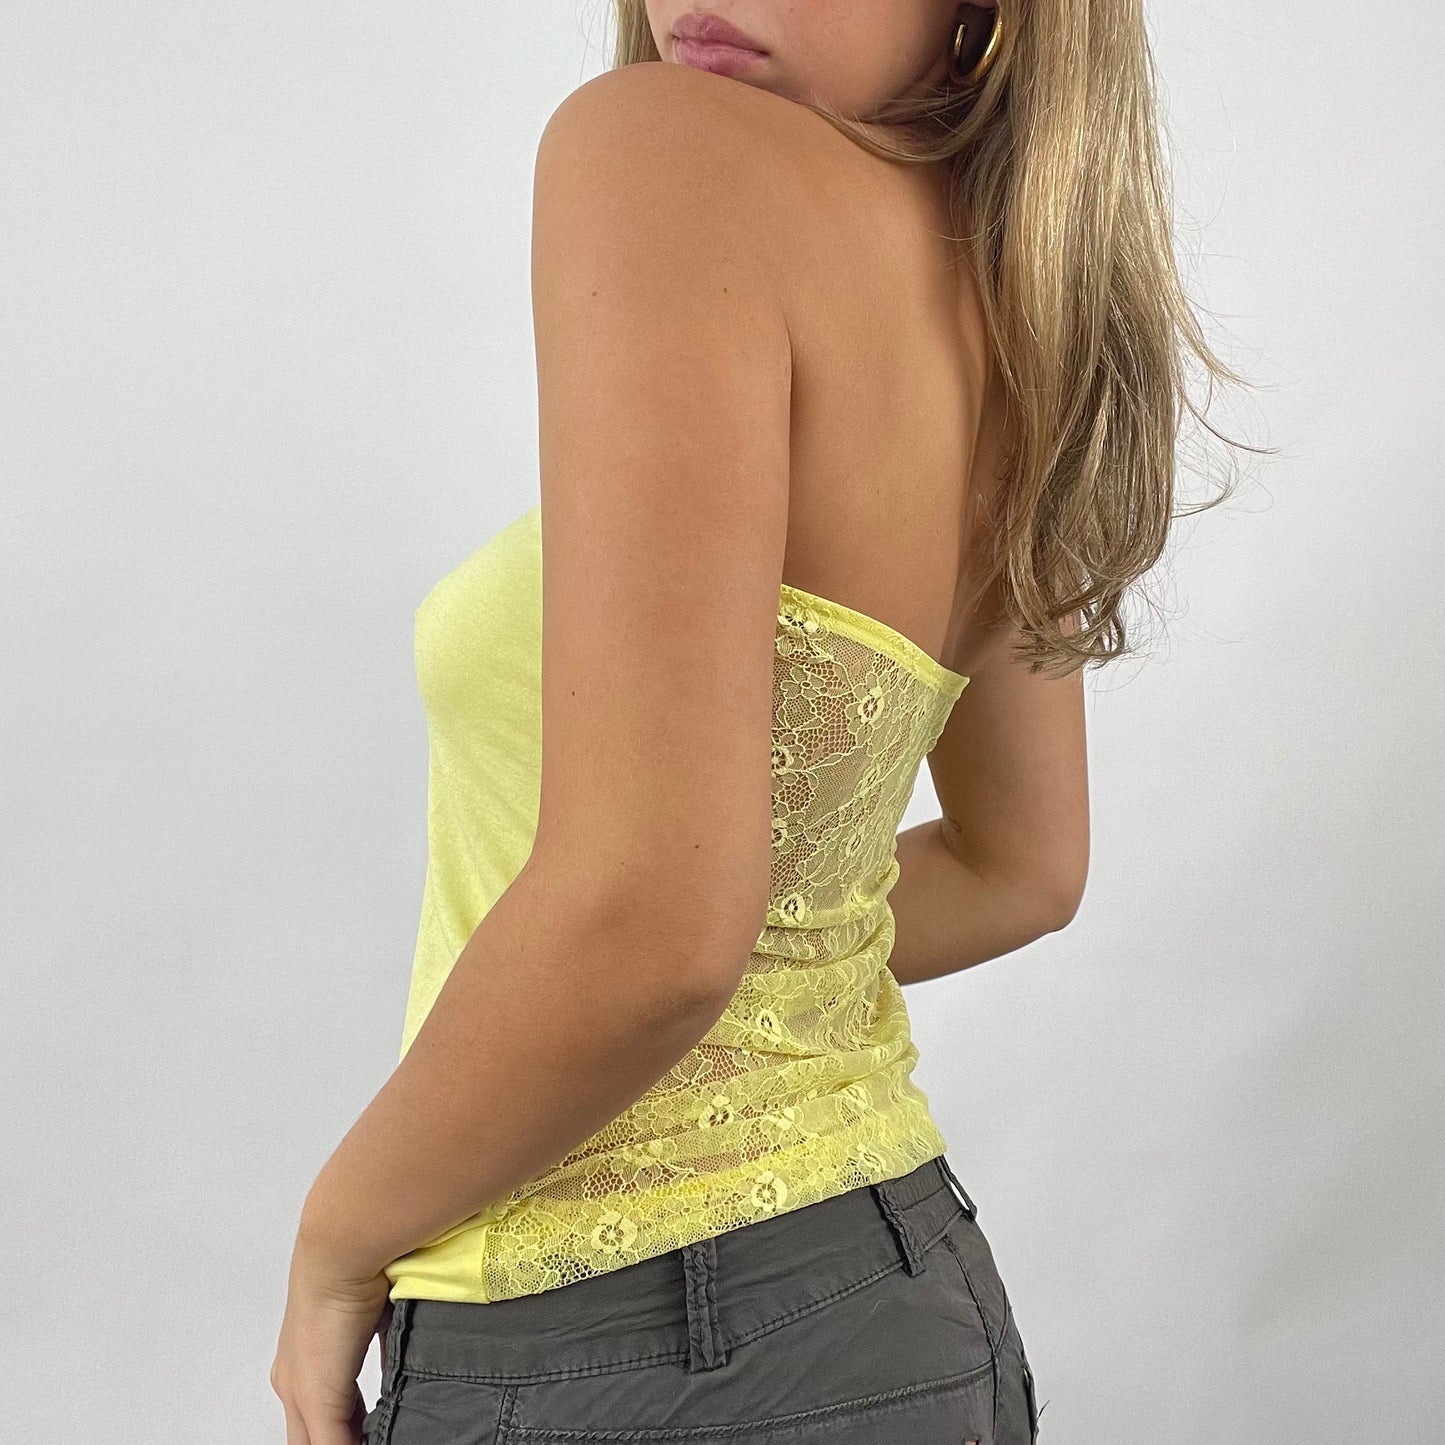 VINTAGE GEMS DROP | small yellow bandeau top with lace back